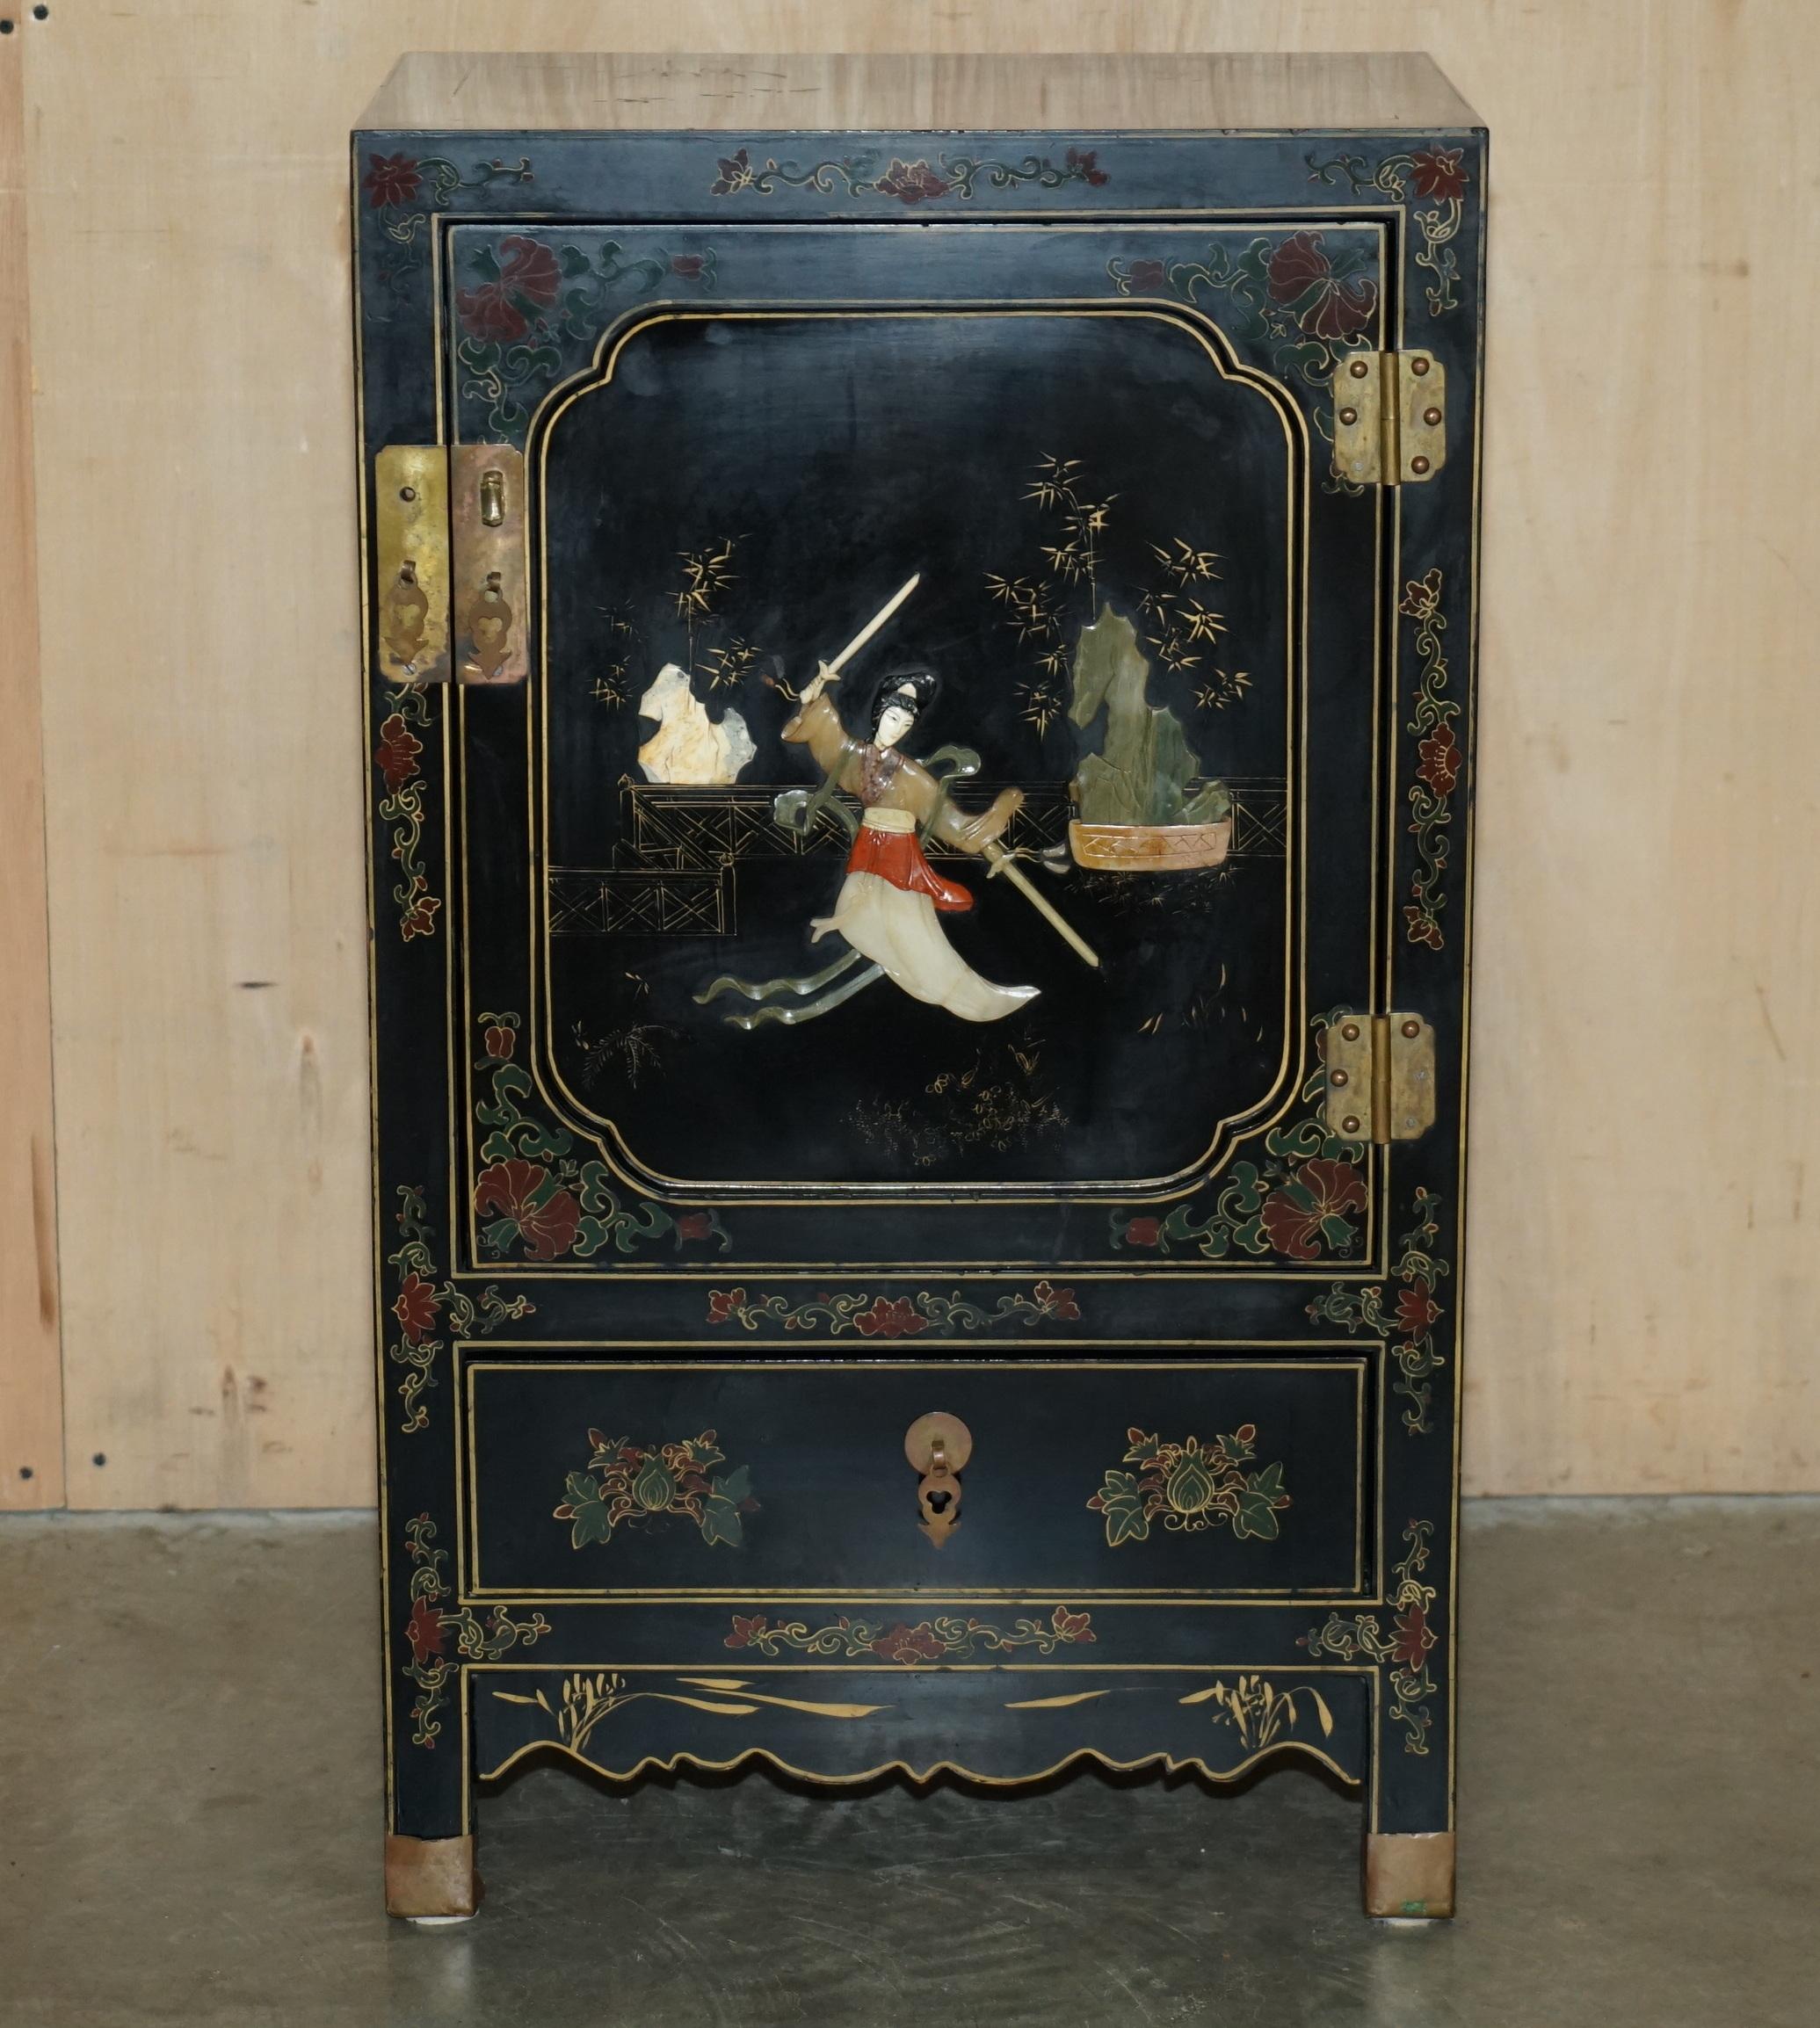 Royal House Antiques

Royal House Antiques is delighted to offer for sale this lovely vintage Chinese side cabinet with native scenes of a Samurai warrior carved out of soapstone and decorated in the Chinoiserie style

Please note the delivery fee